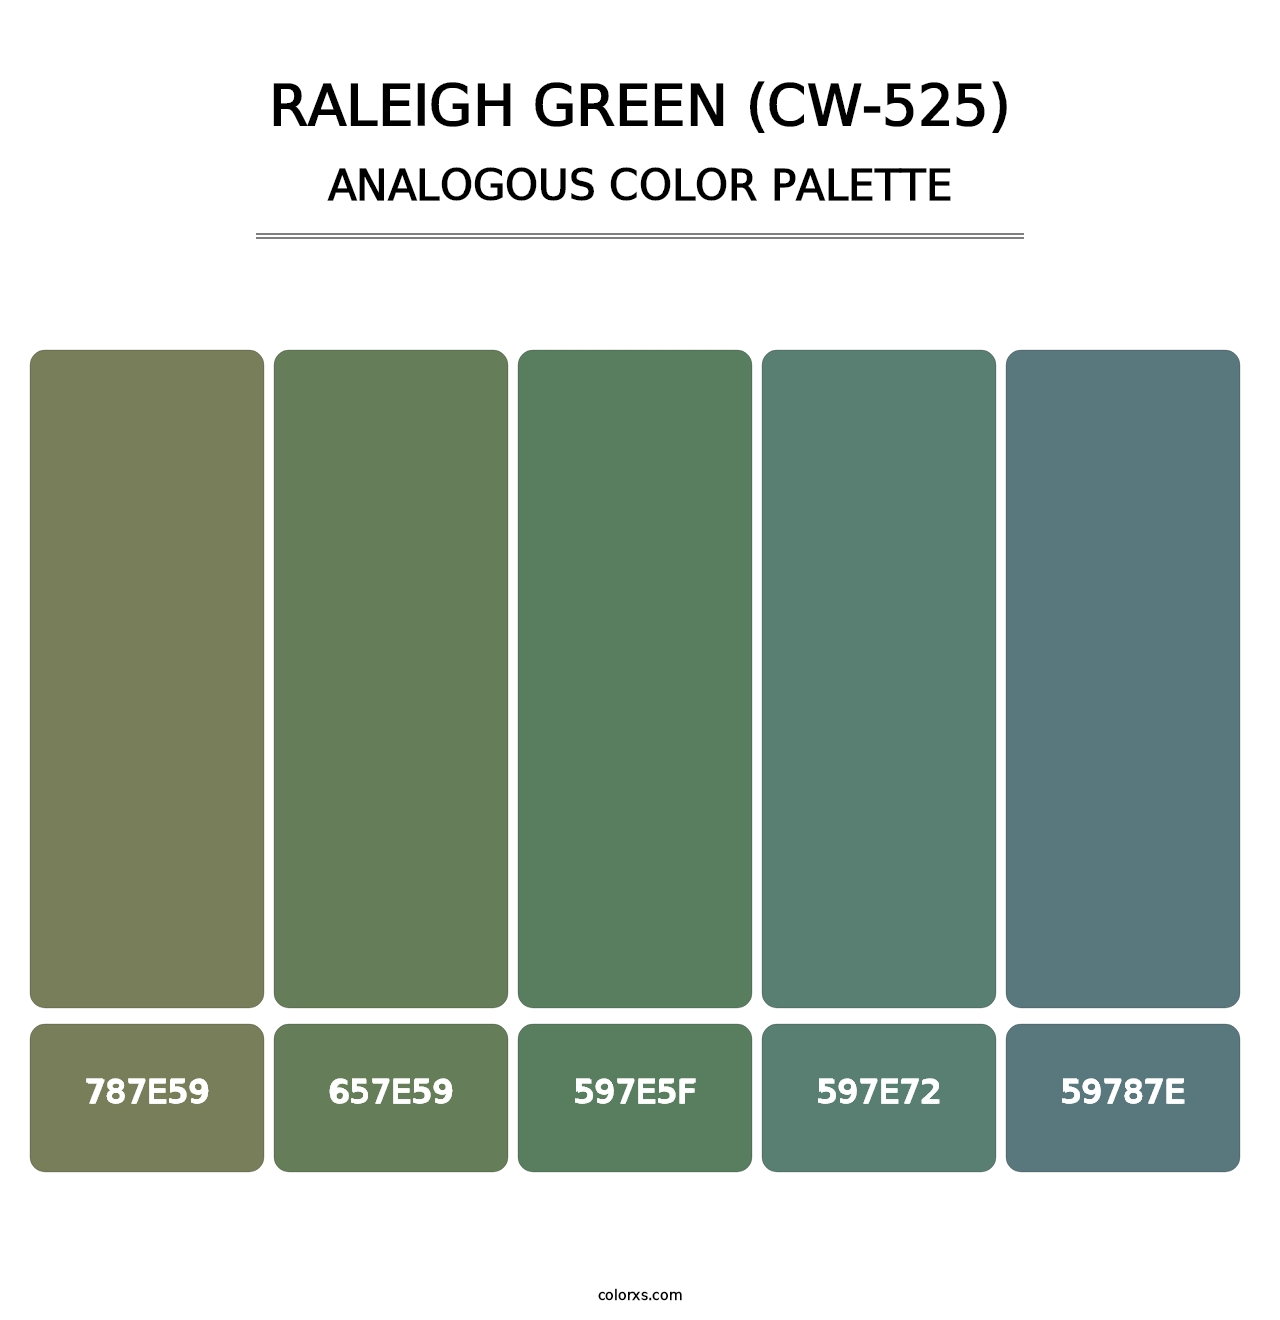 Raleigh Green (CW-525) - Analogous Color Palette